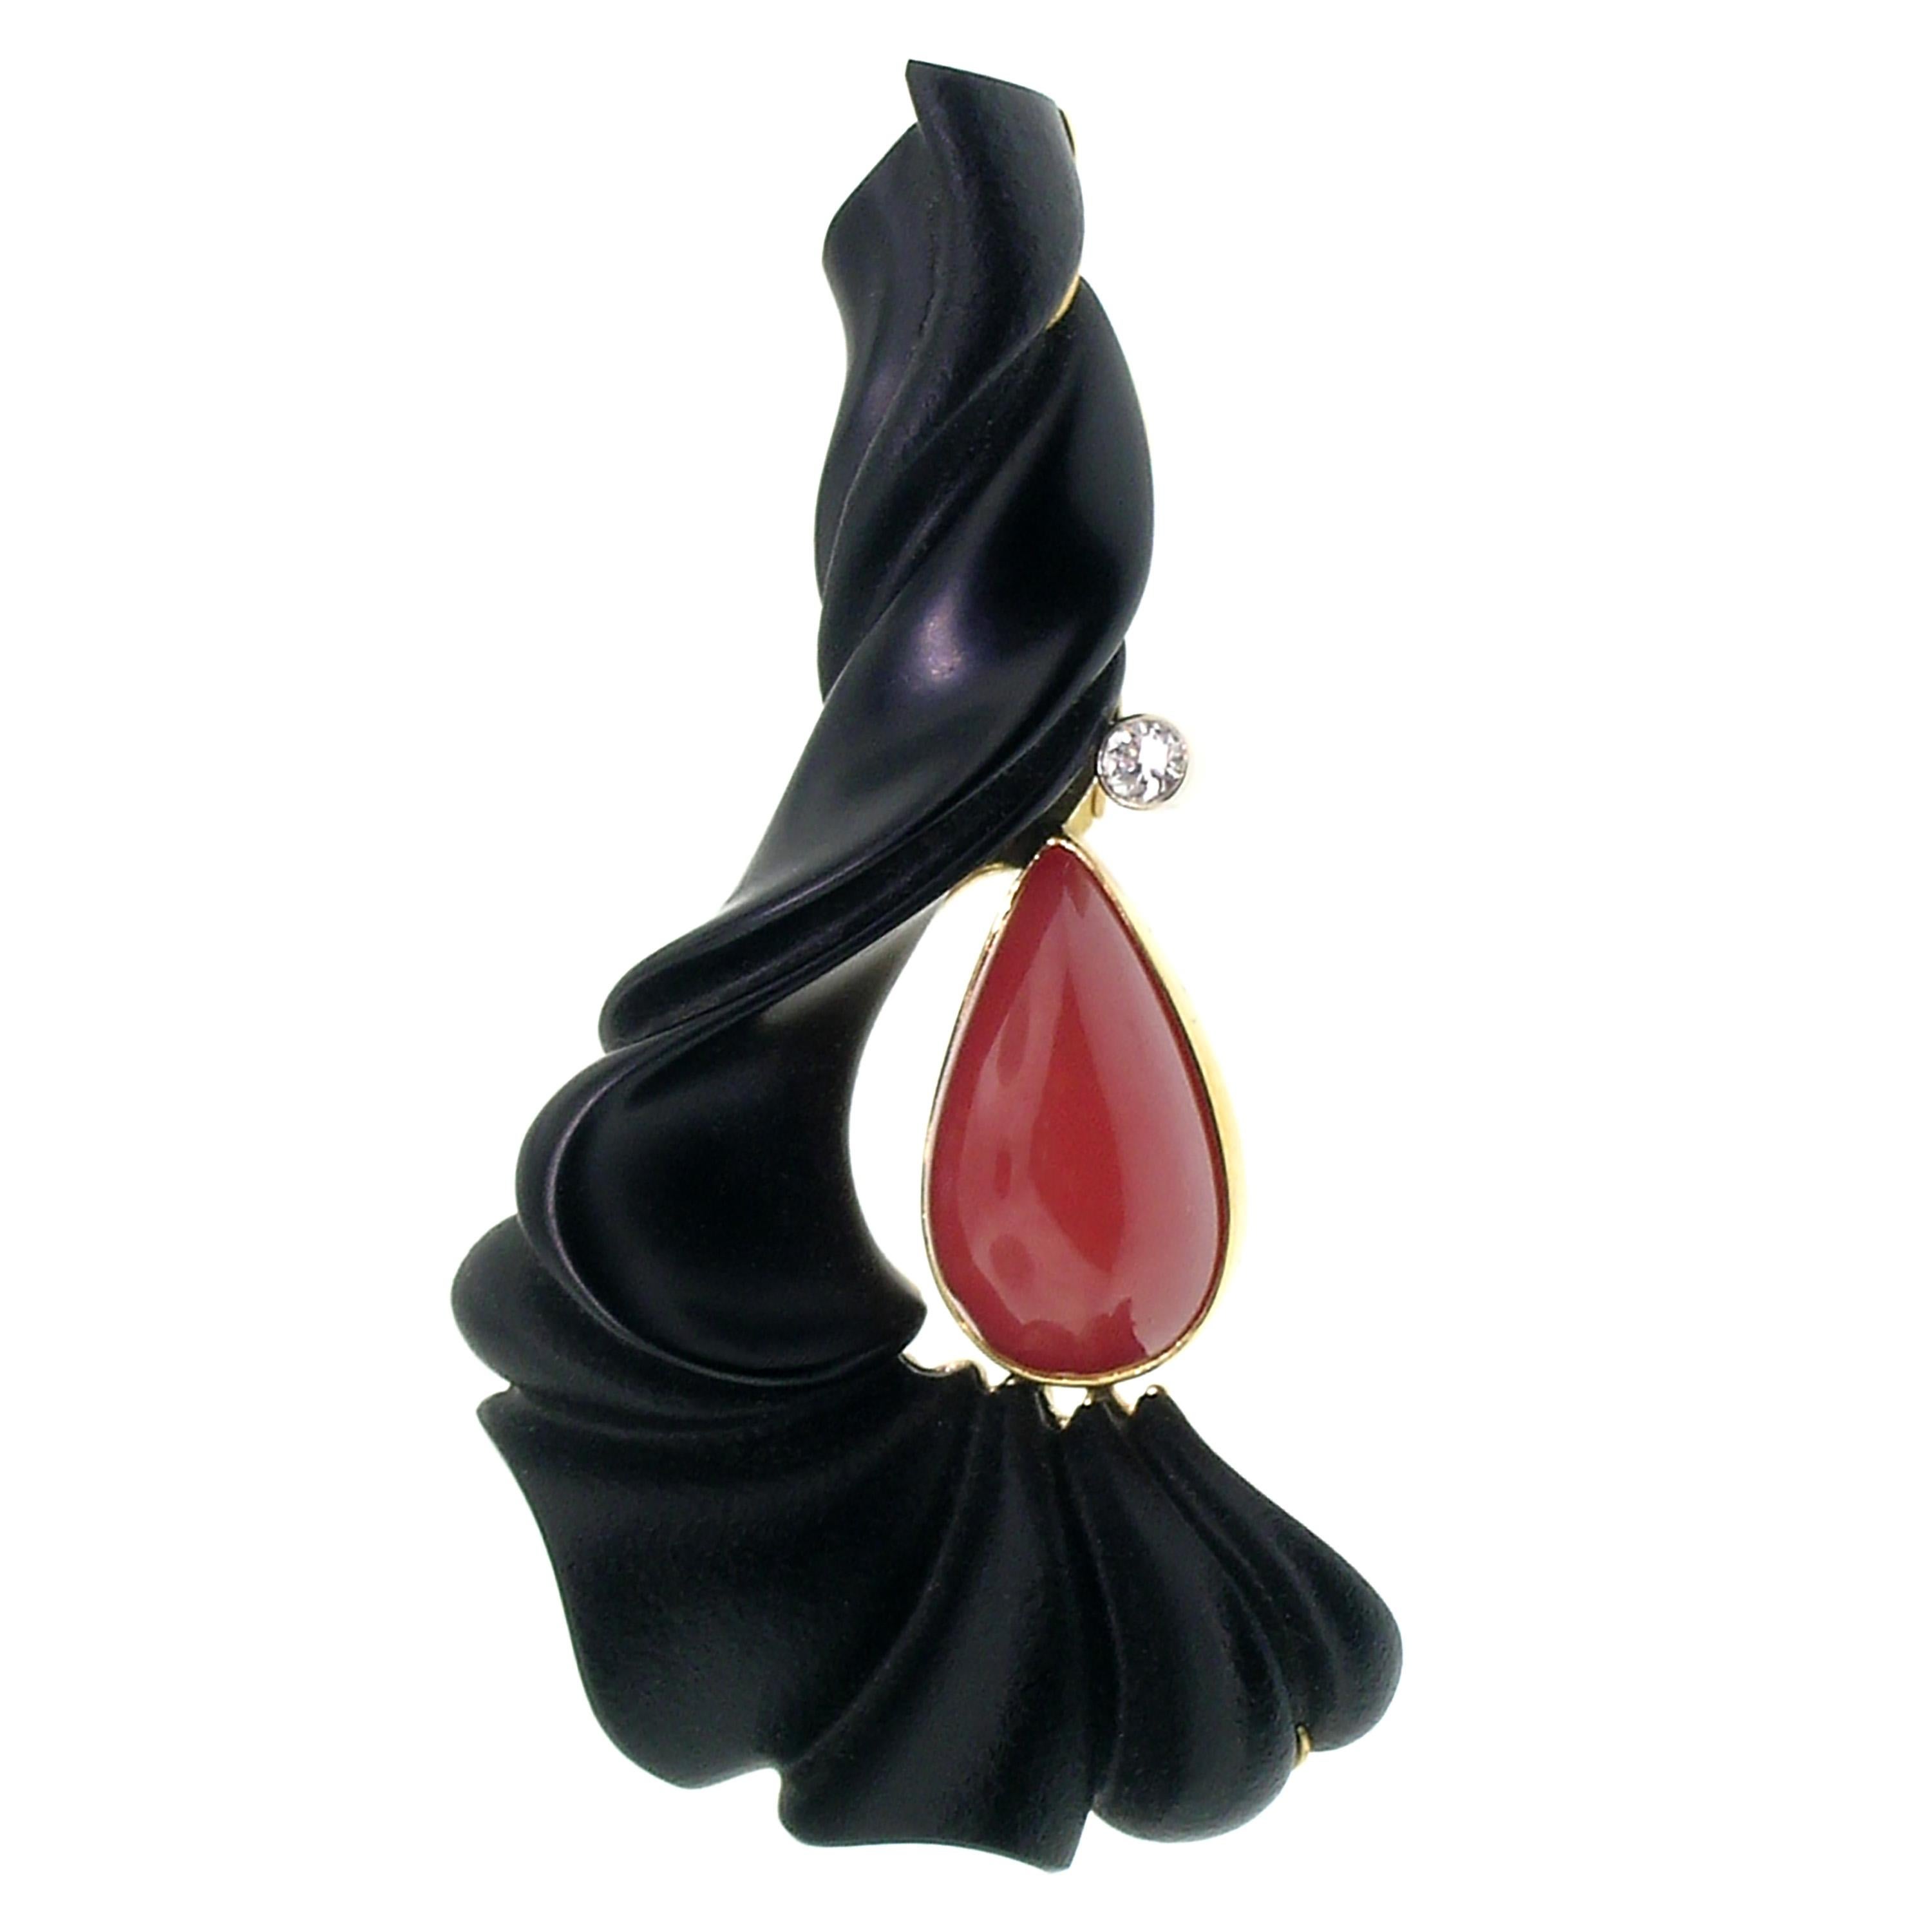 This gorgeous ruffle of natural black chalcedony was perfectly carved by lapidary artist Steve Walters. The ruffle wraps around a pear shaped pink bustamite, an exceedingly rare and beautiful gemstone. This piece is finished perfectly with a single